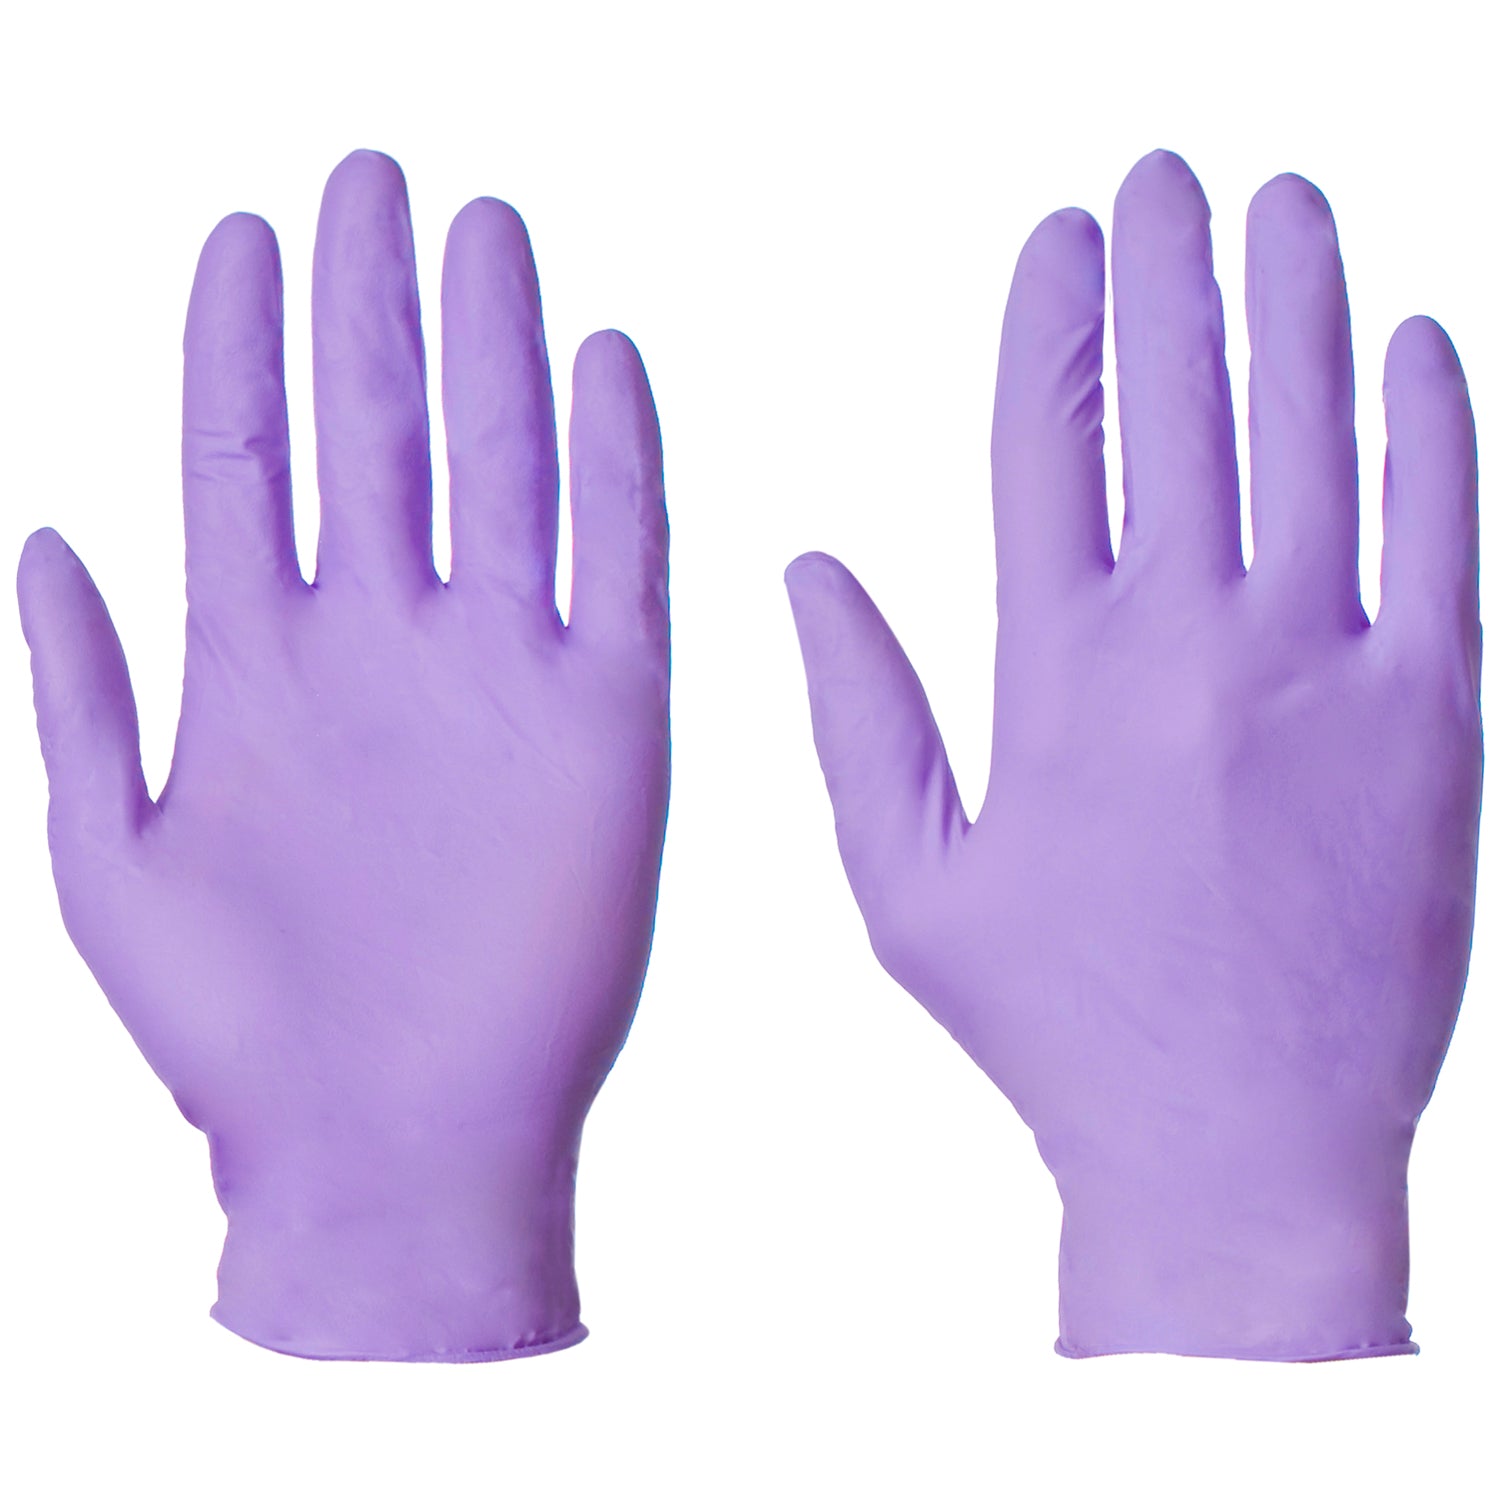 Supertouch Powderfree Disposable Nitrile Gloves (Box of 100)